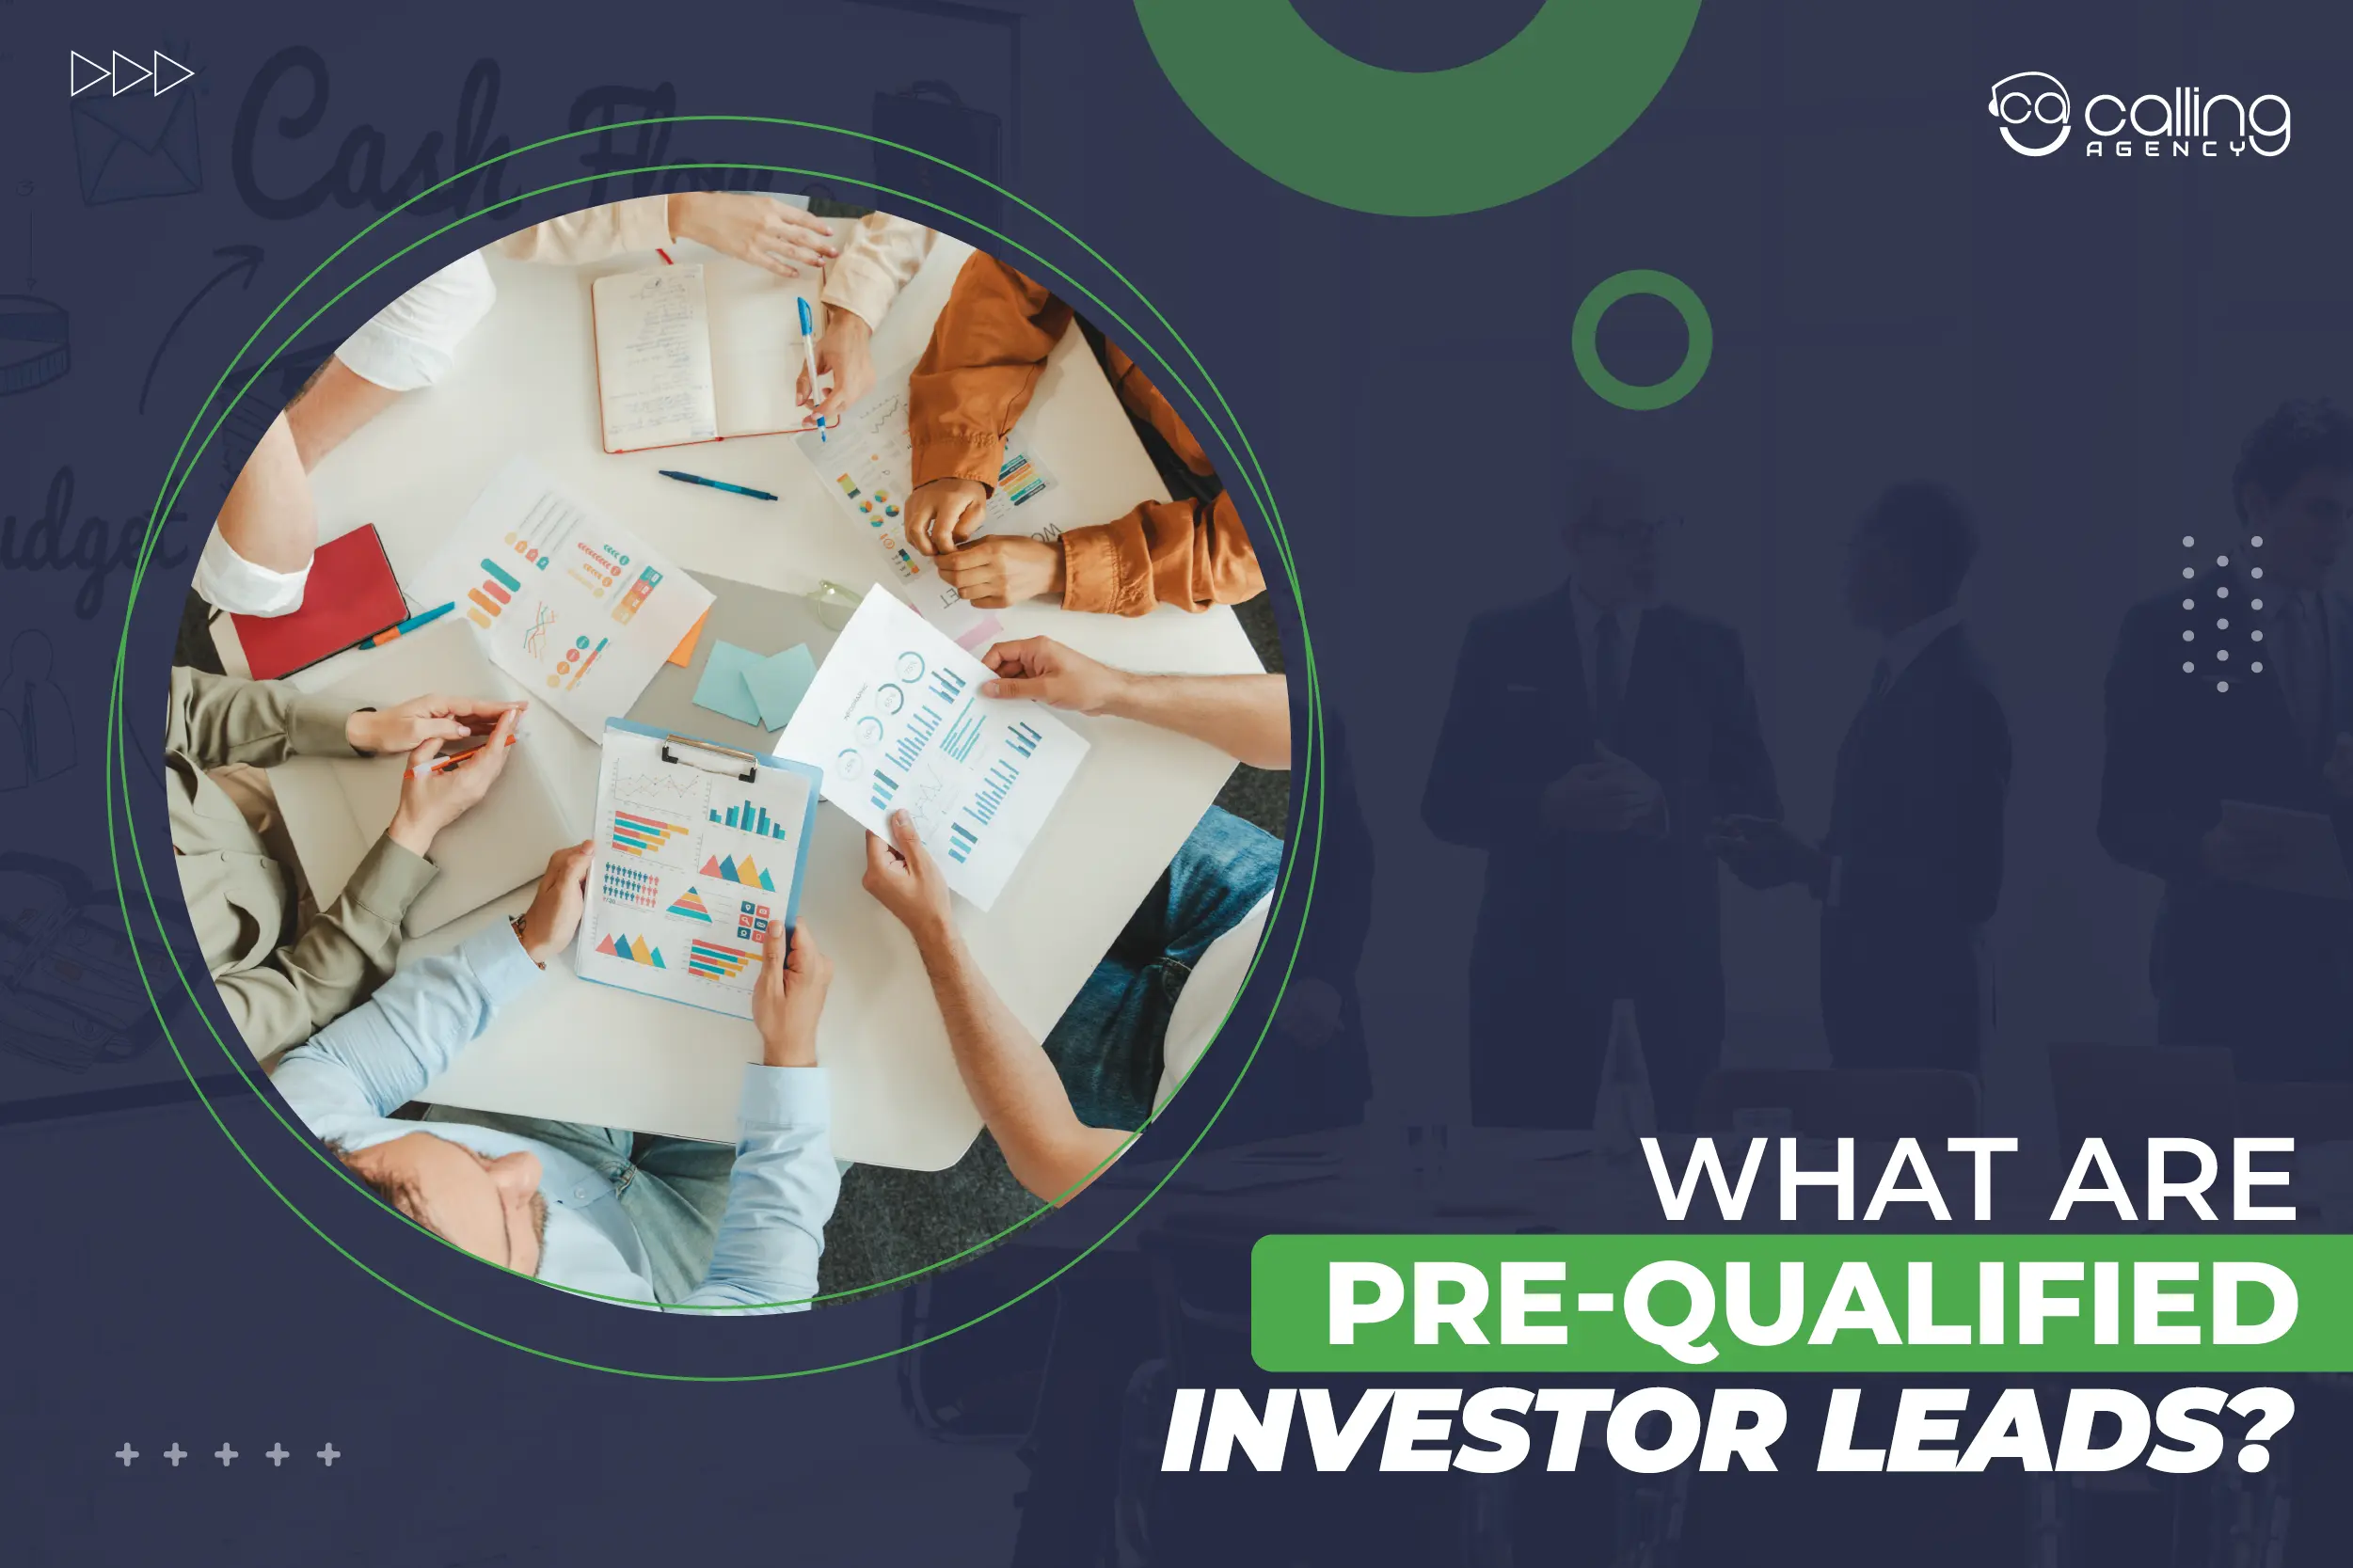 What Are Pre-Qualified Investor Leads?